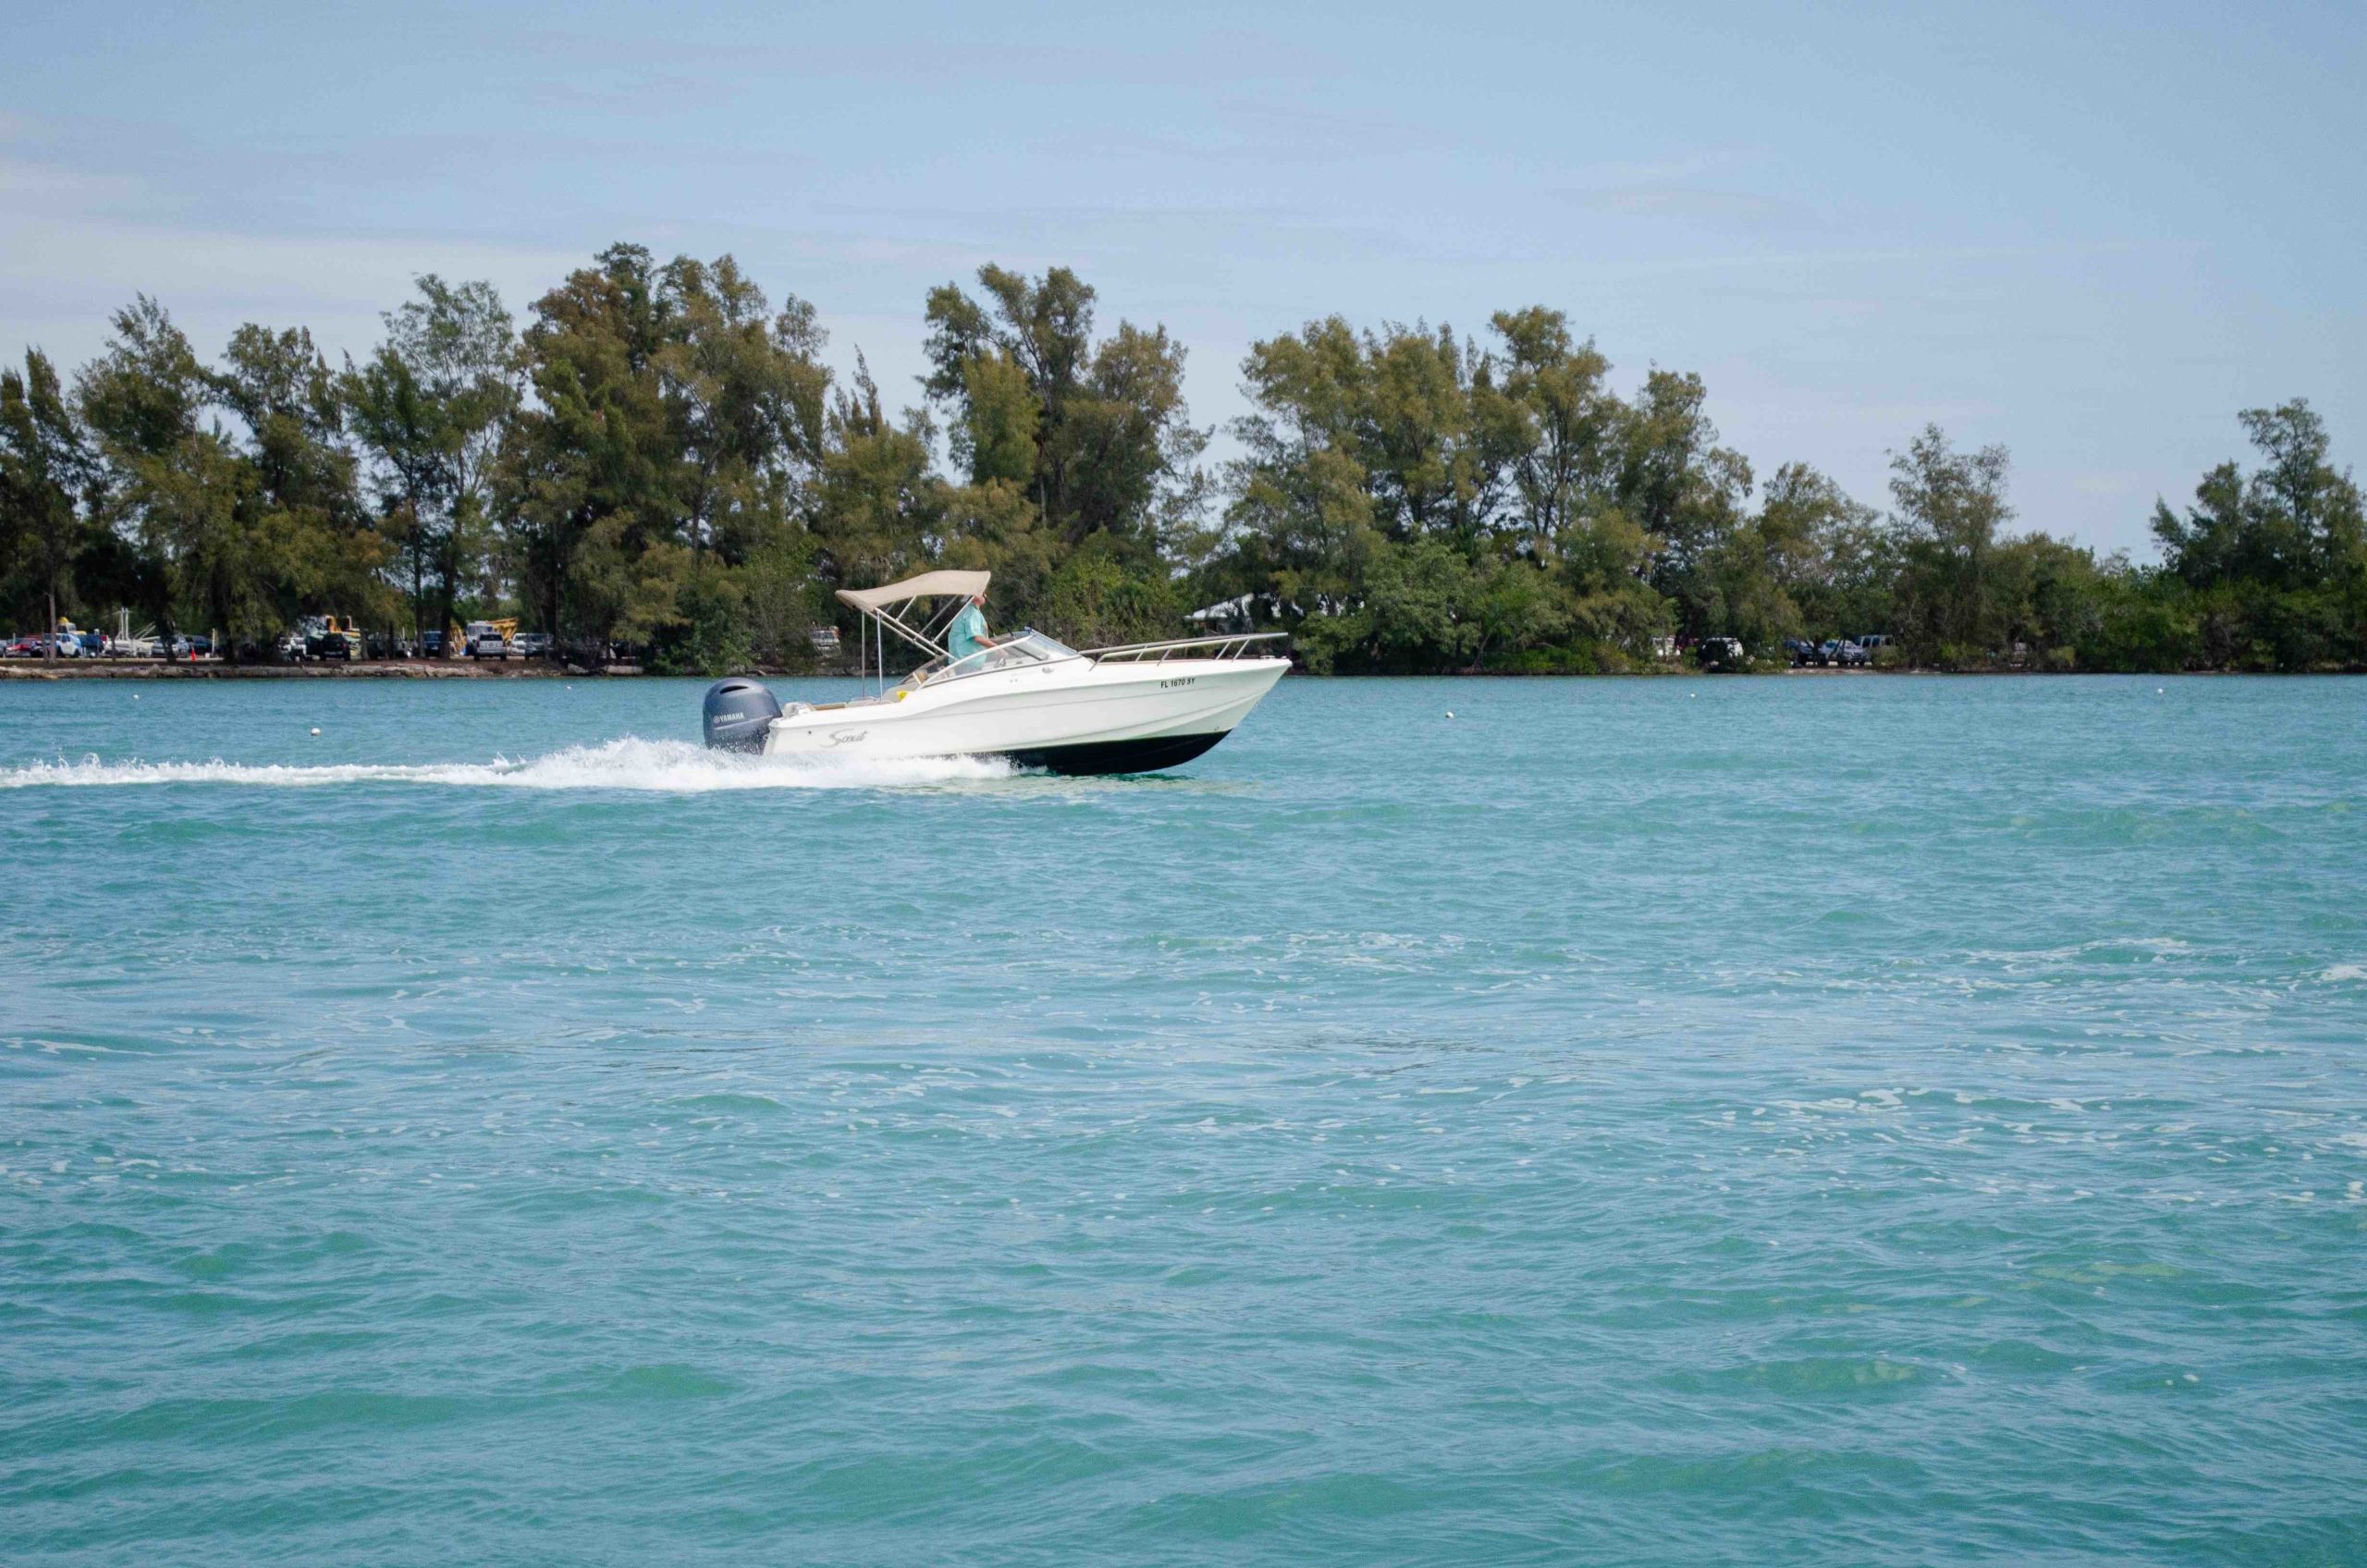 Boating accidents can have a long-lasting impact. Boat pictured traveling on the open water.